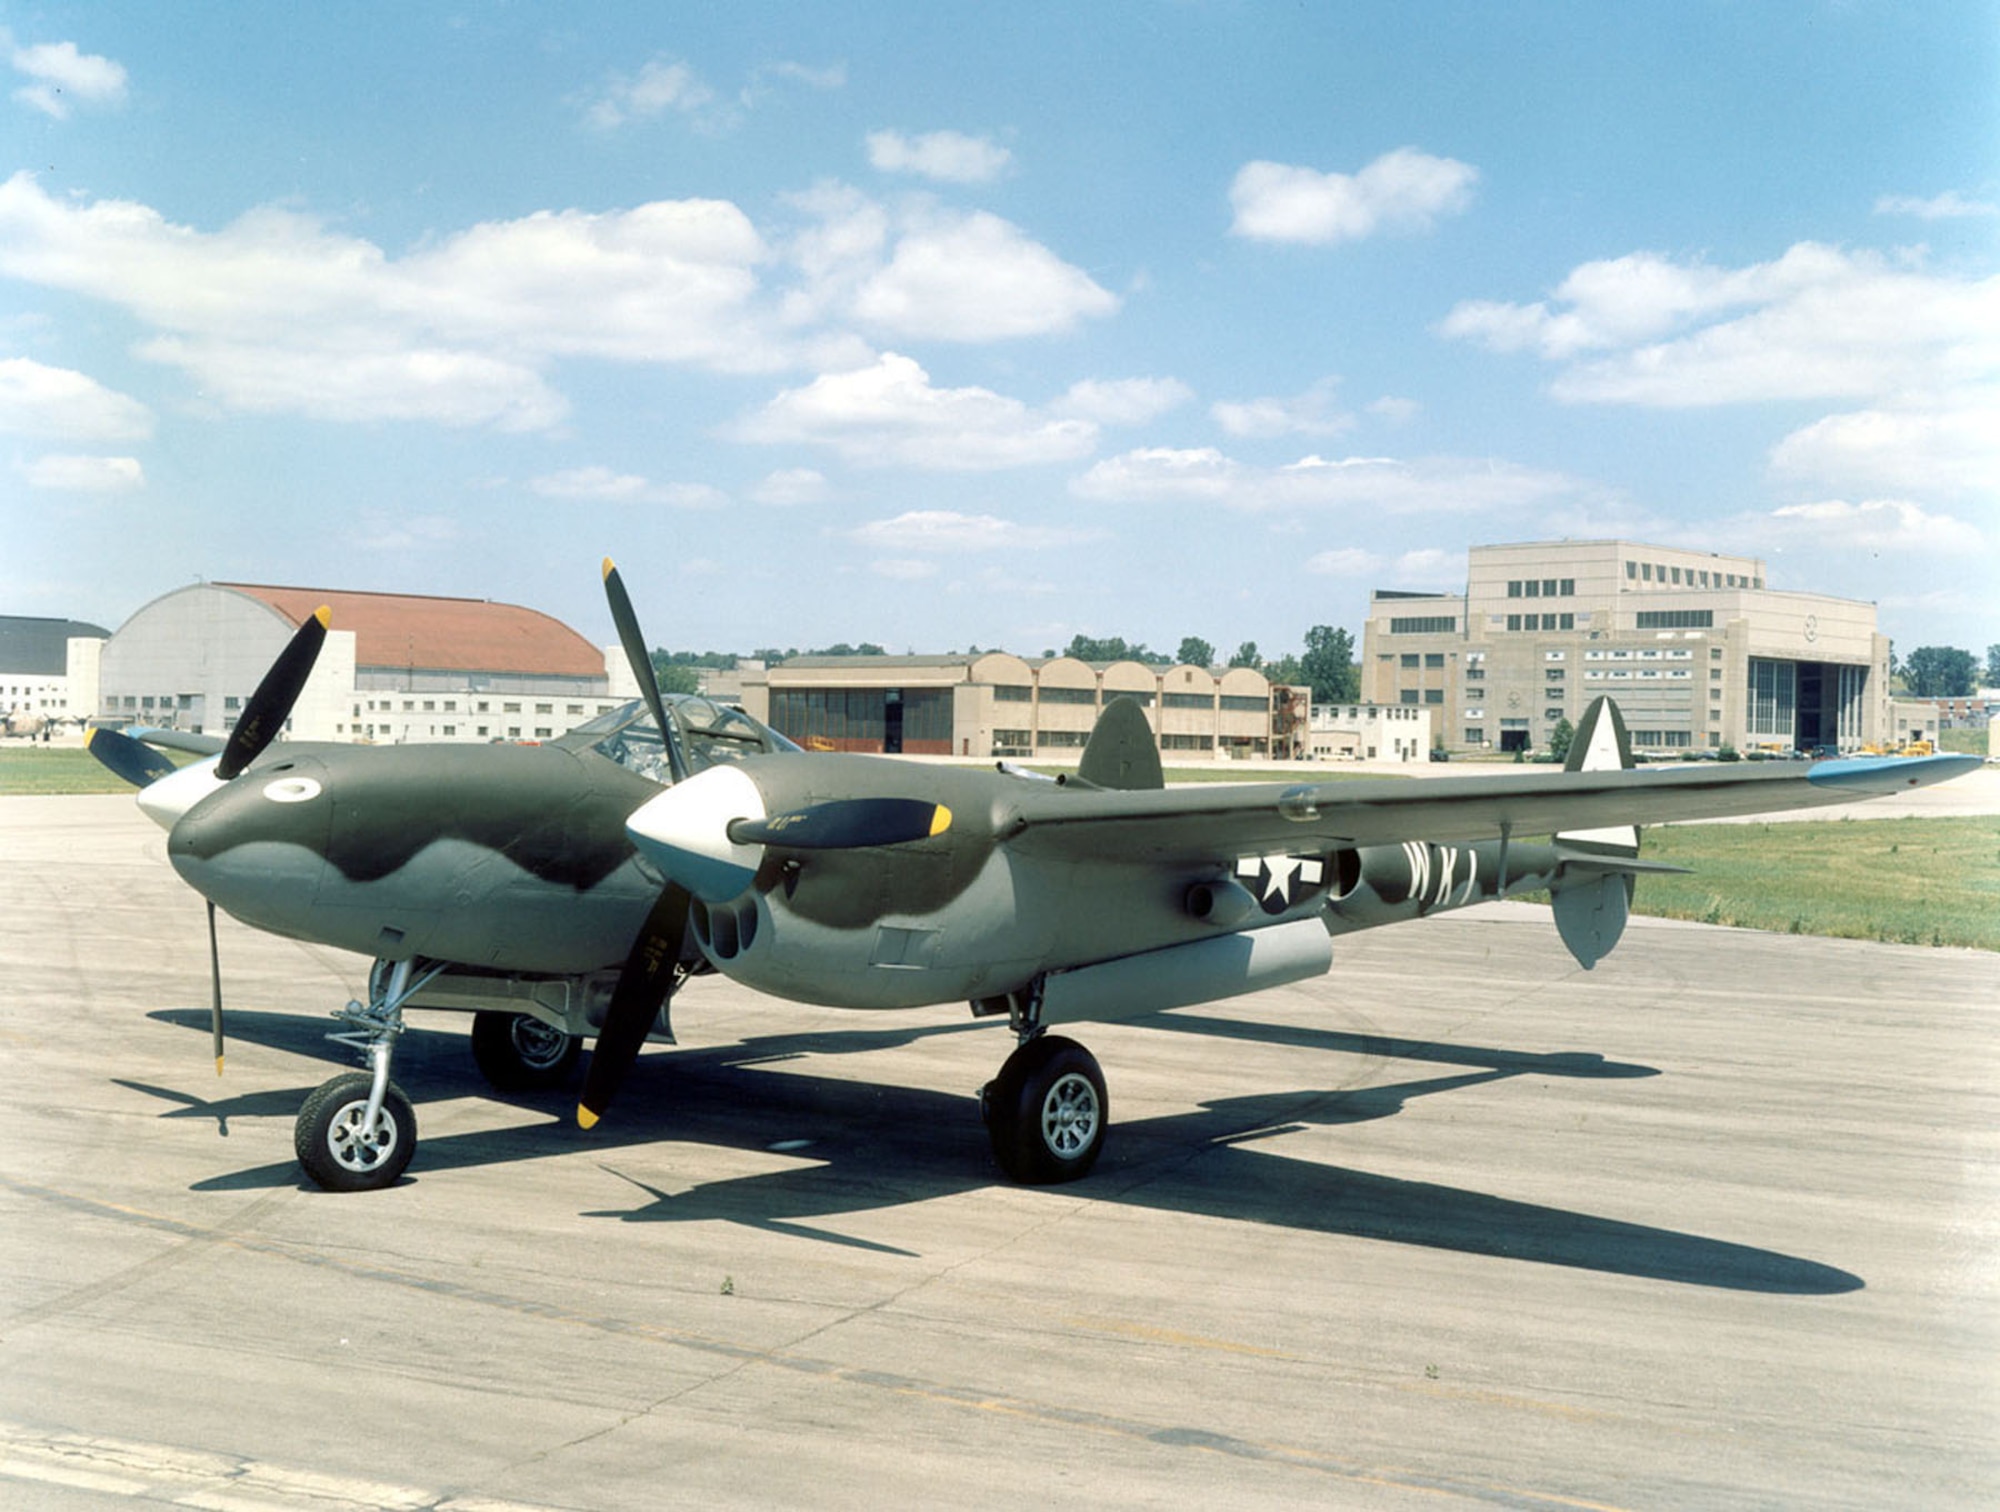 DAYTON, Ohio -- Lockheed P-38L Lightning at the National Museum of the United States Air Force. (U.S. Air Force photo)